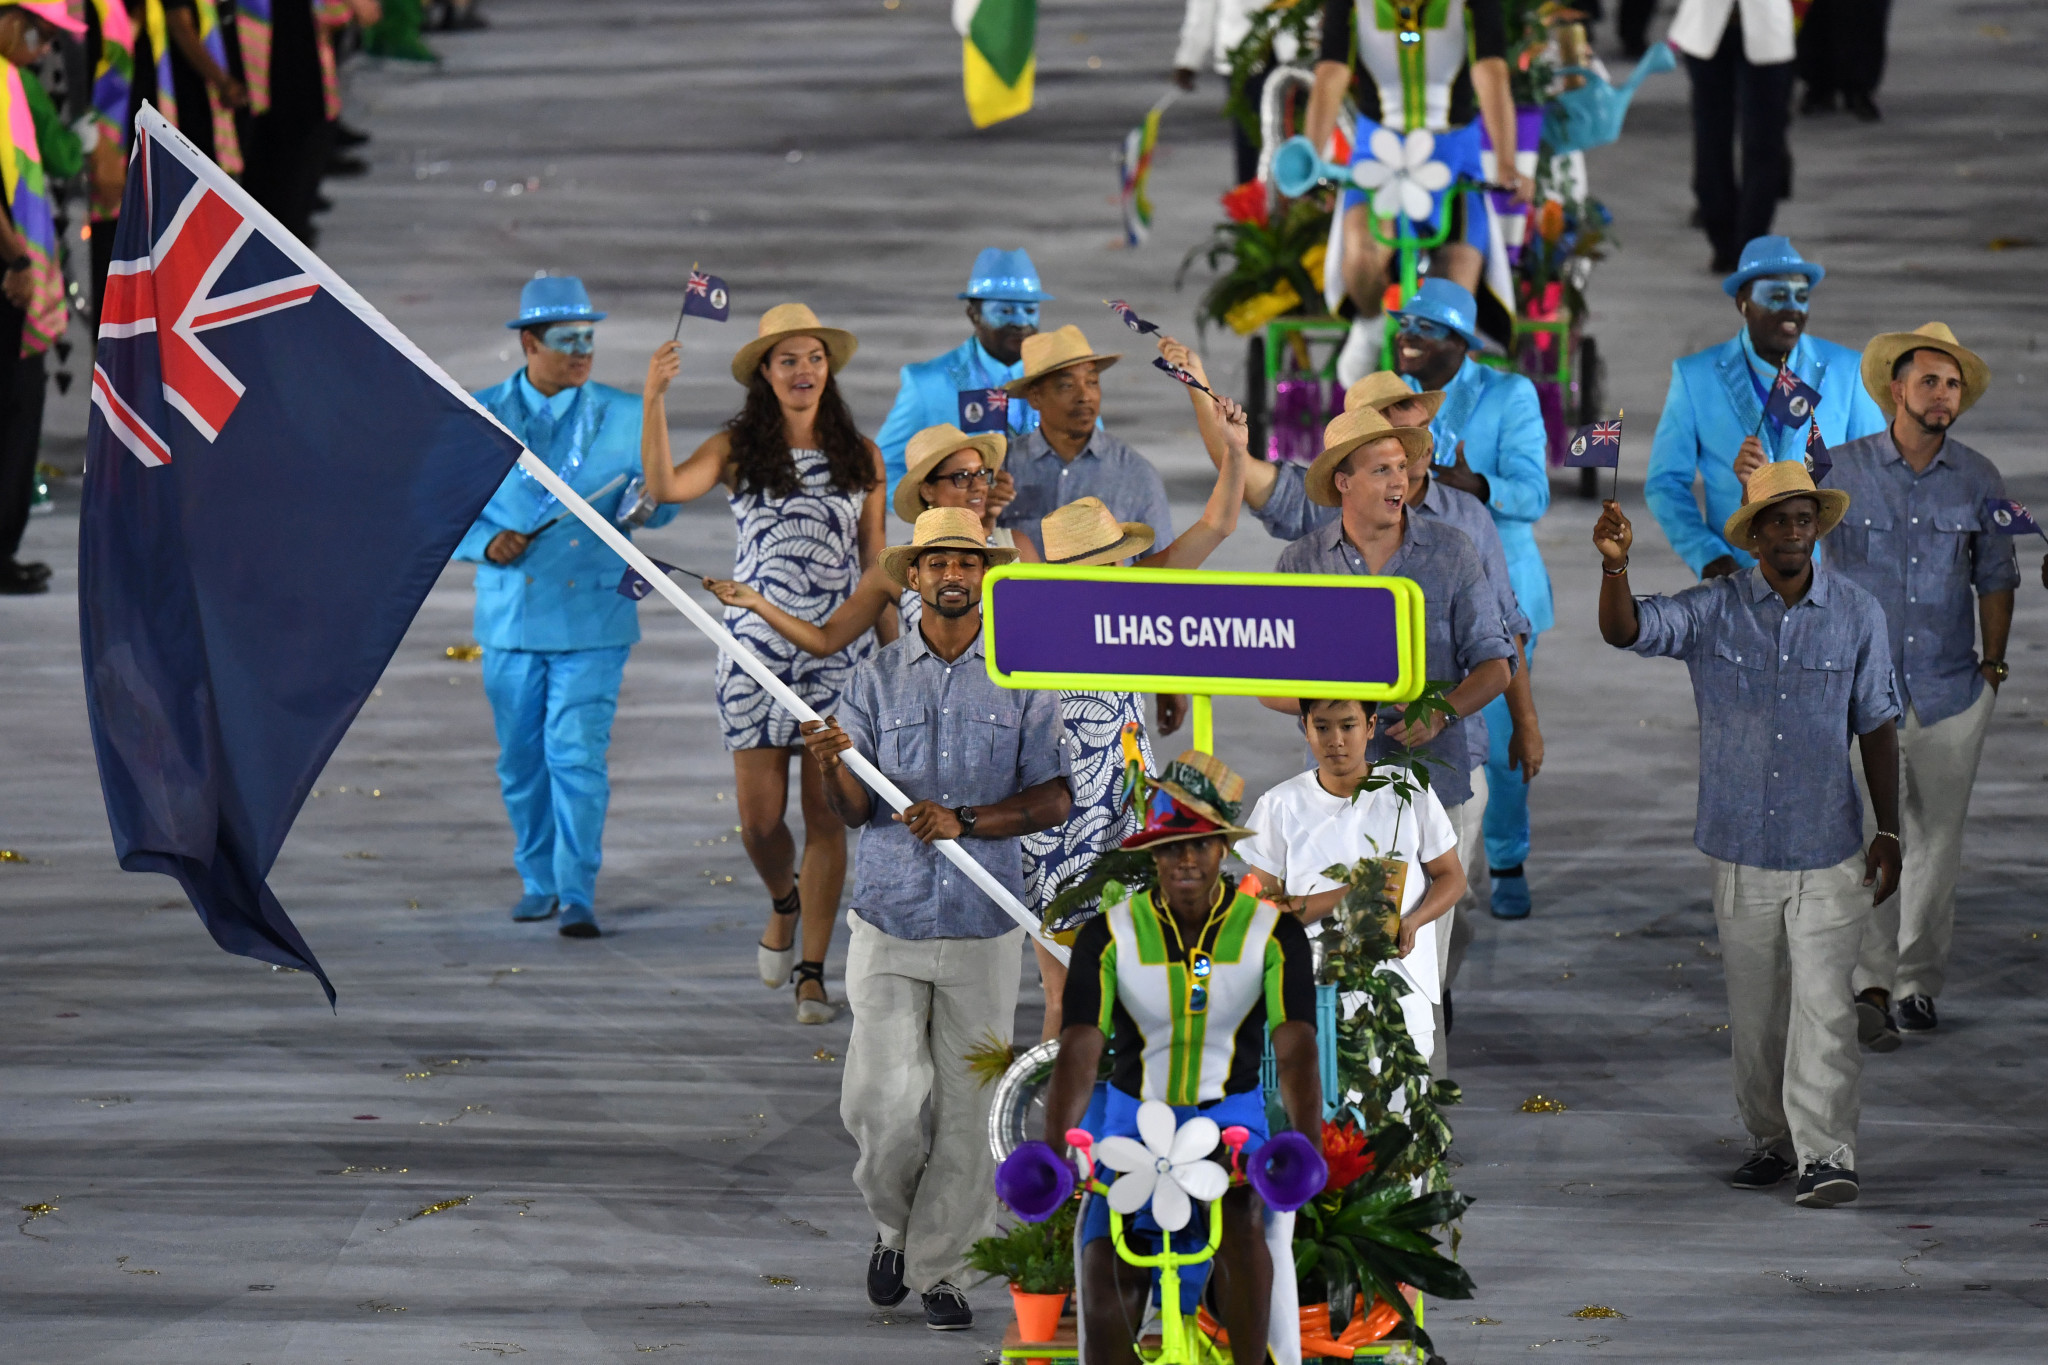 The Cayman Islands have now appeared at 10 Summer Olympic Games ©Getty images